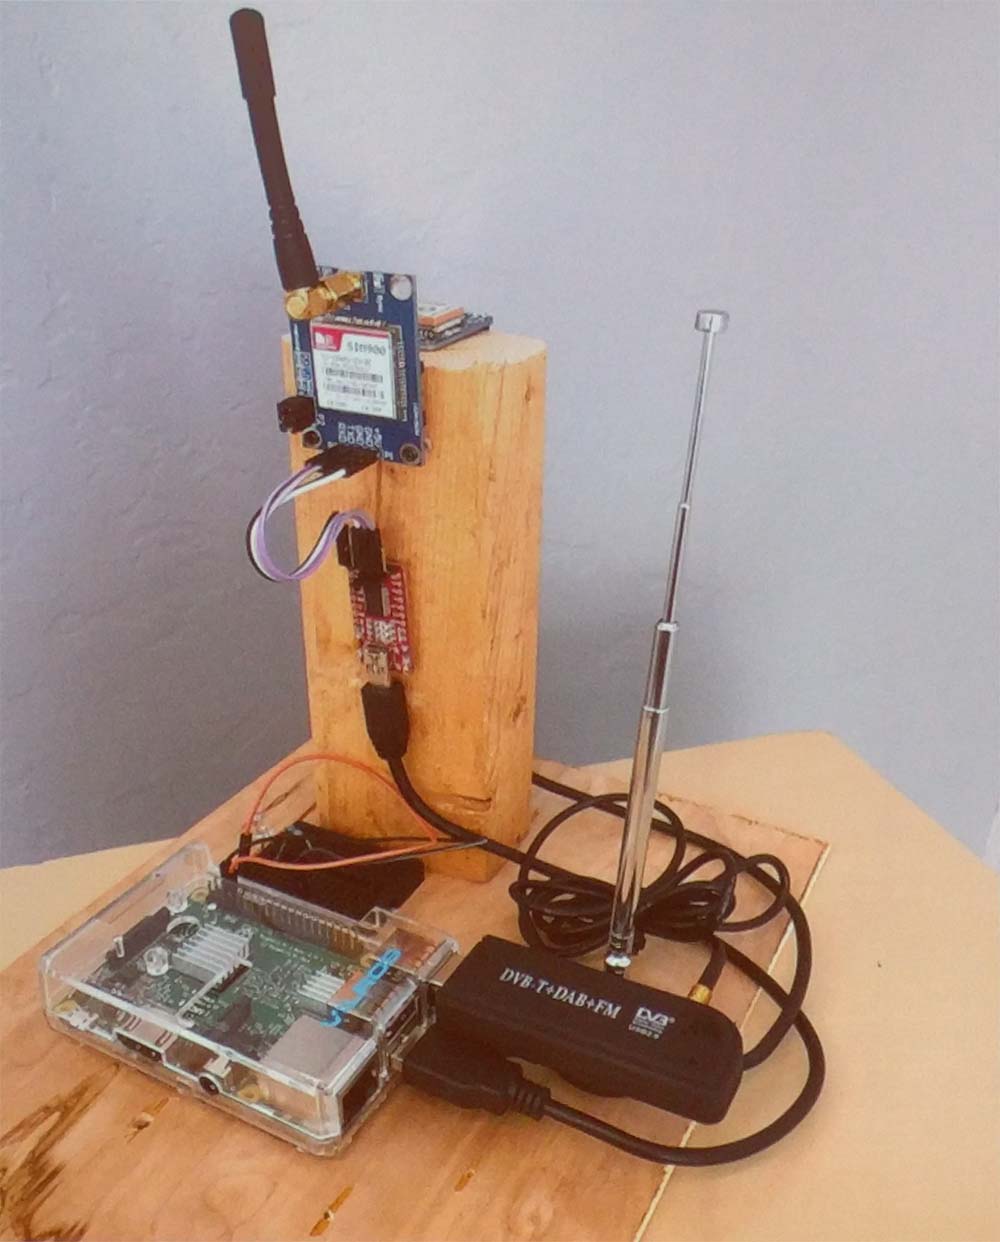 How To Detect And Find Rogue Cell Towers Hackaday